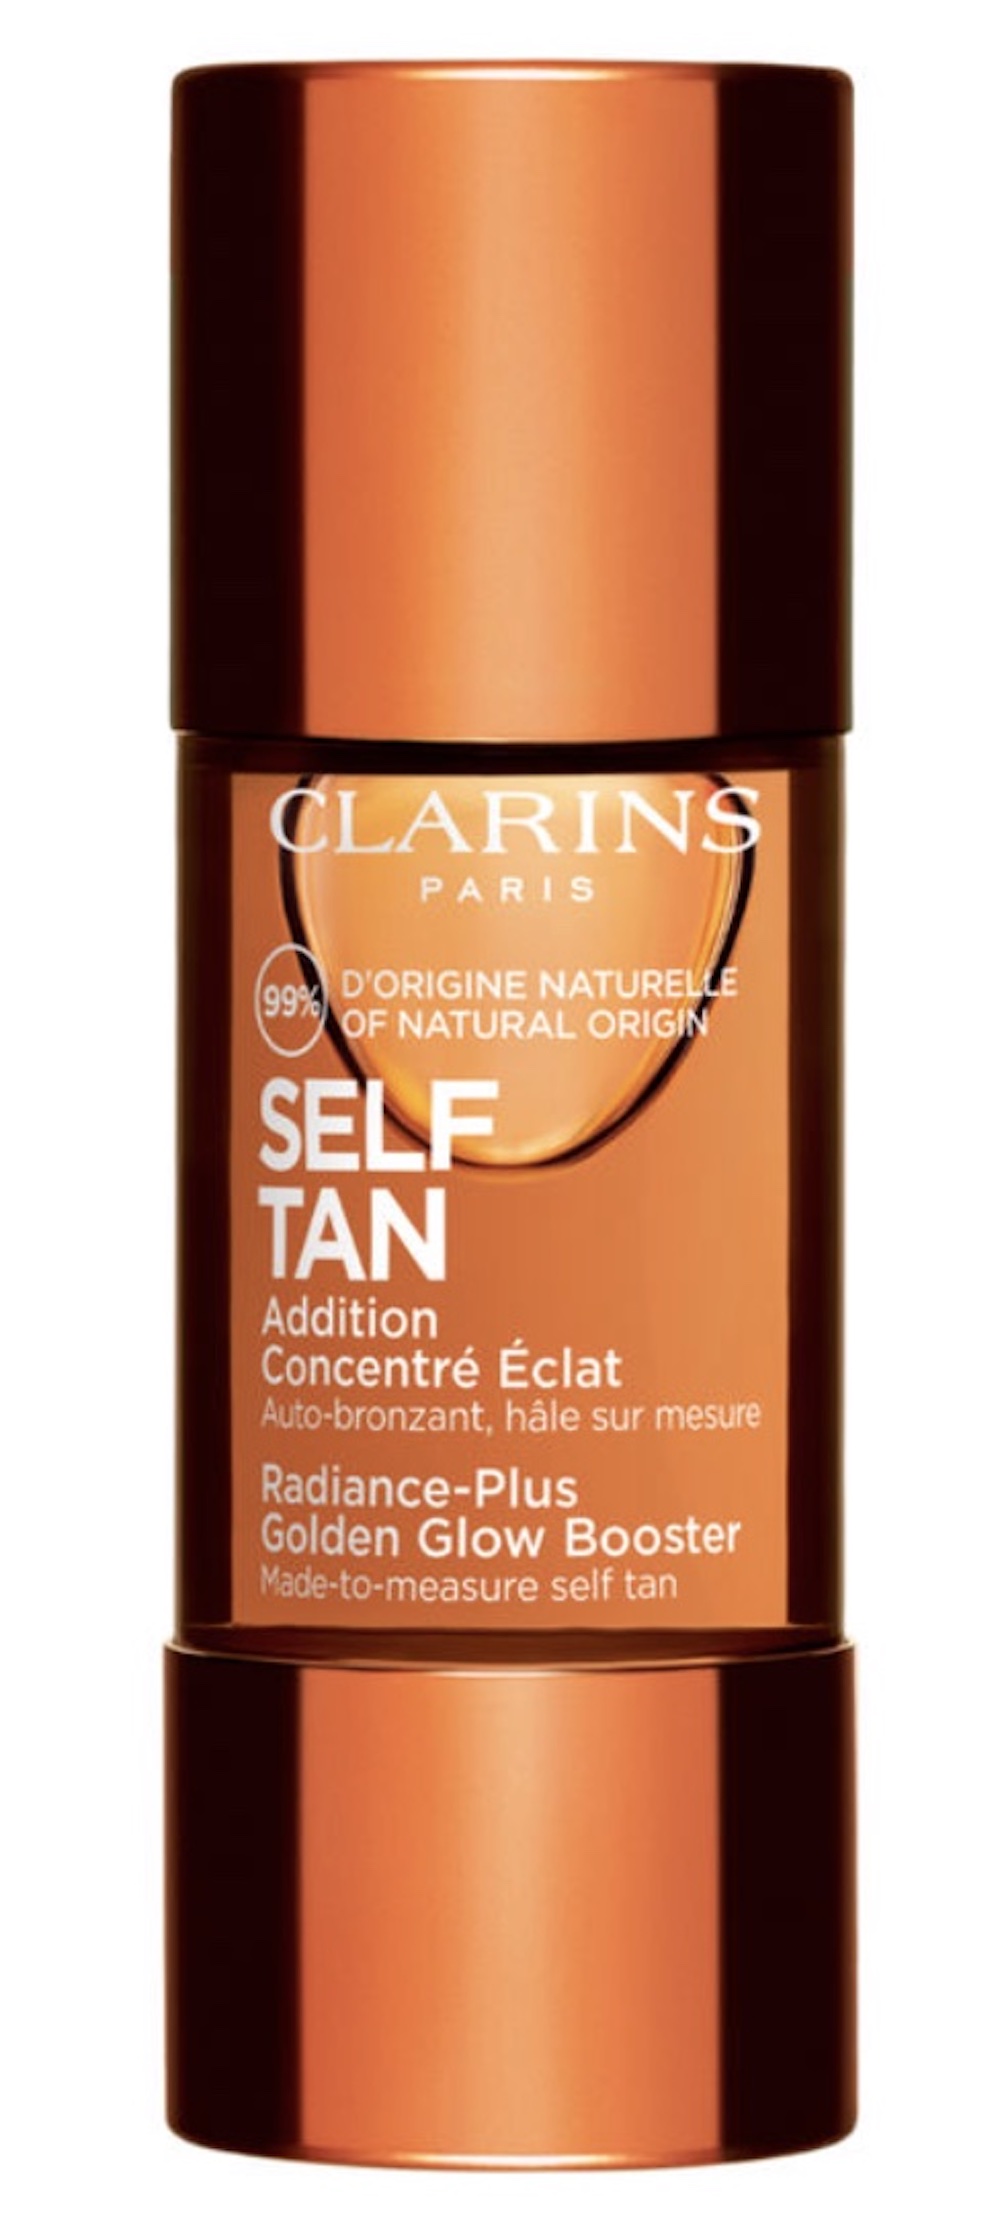 Clarins glow boosters